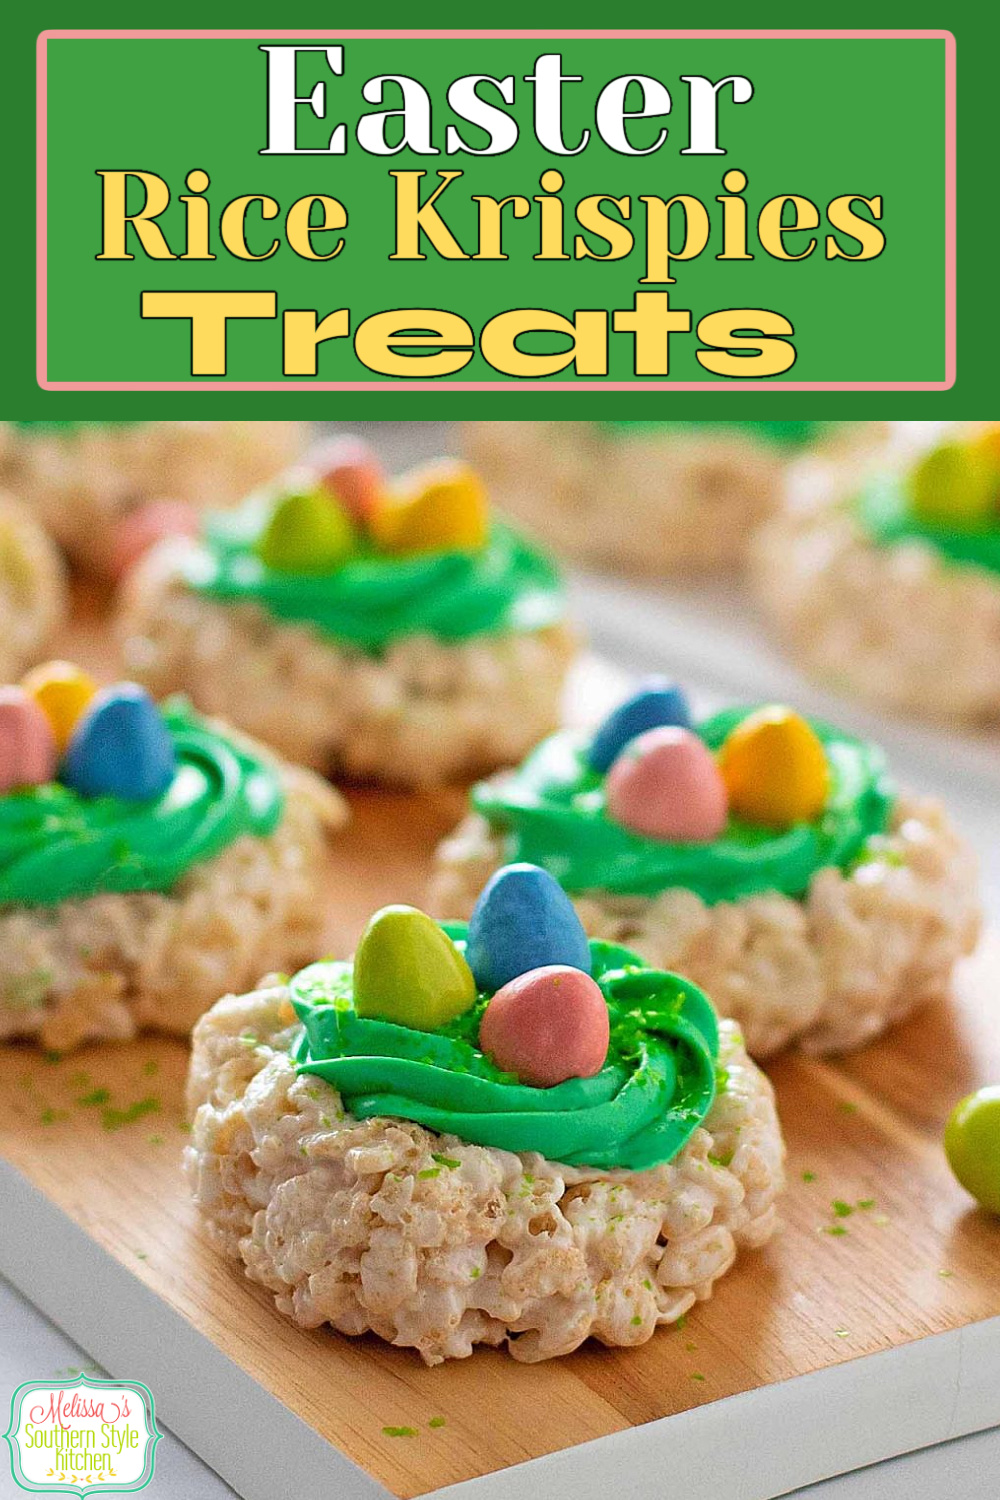 Kids of all ages will love these cute little Easter Rice Krispies Treats #easterdesserts #easterricekrispiestreats #eastercandy #ricekrispiestreats #easternests #ricekrispiestreatsnests via @melissasssk